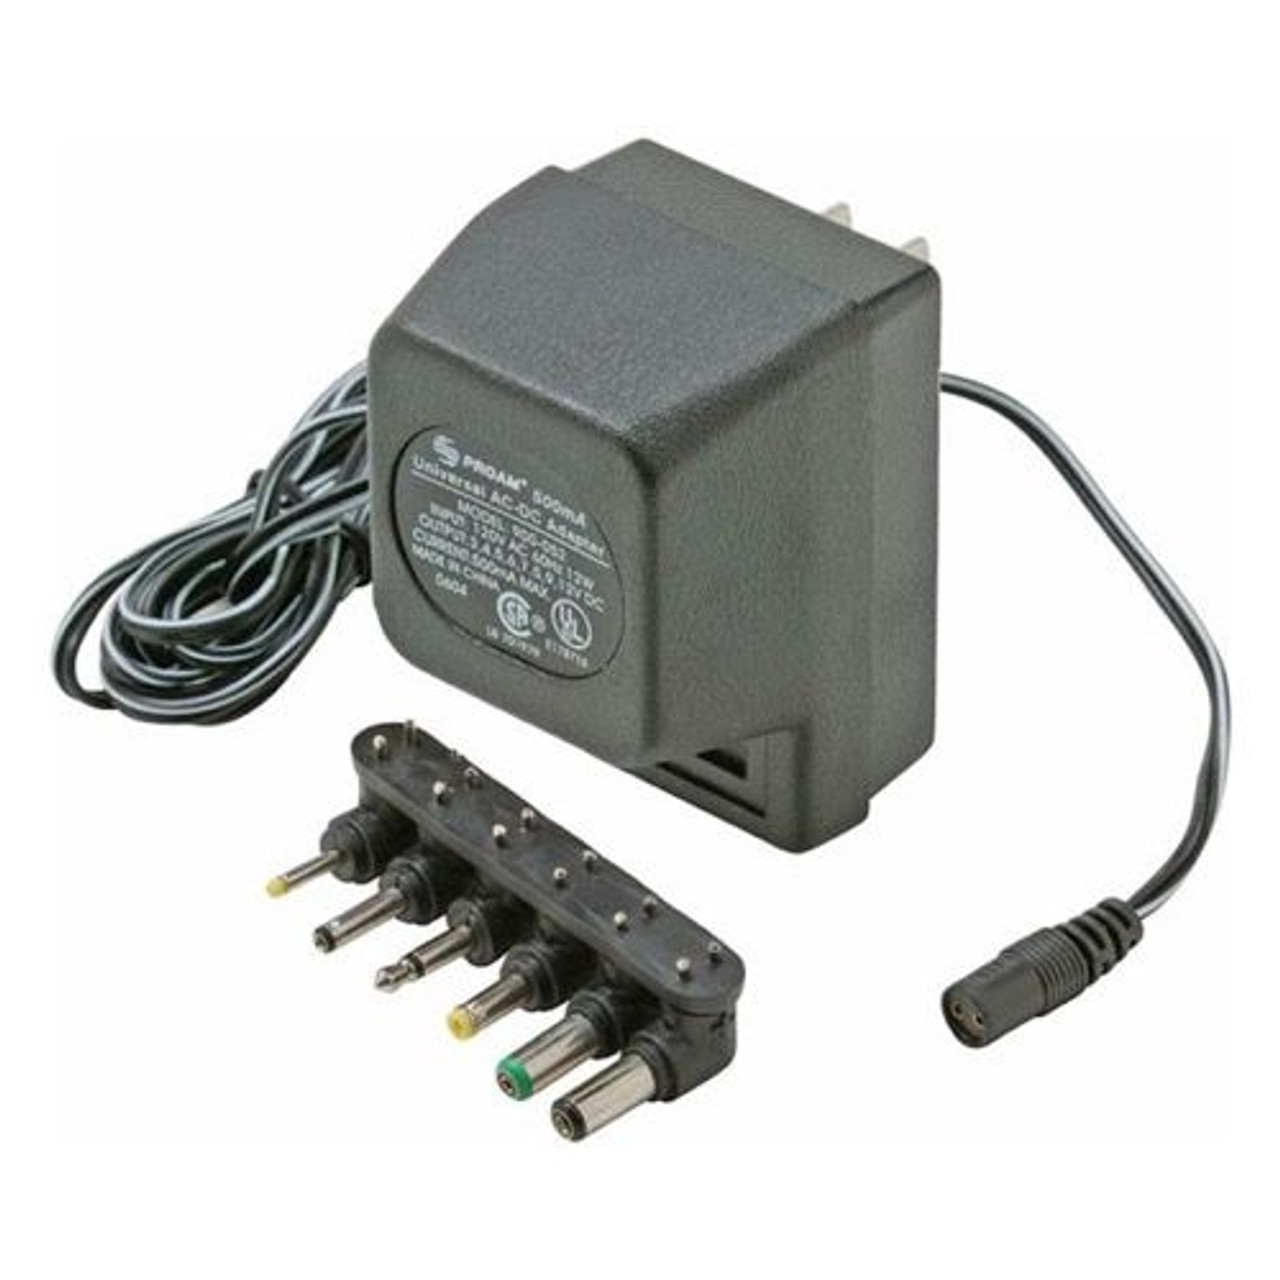 Steren 900-052 Universal Supply Adapter 500mA AC/DC with 6 Detachable Plugs Converter Volt UL Transformer AC DC Power Adapter Supply 110 VAC 50-60 Hz Adapter with Switchable Voltage Outputs 3, 4.5, 6, 7.5, 9, 12 VDC, Part # 900052